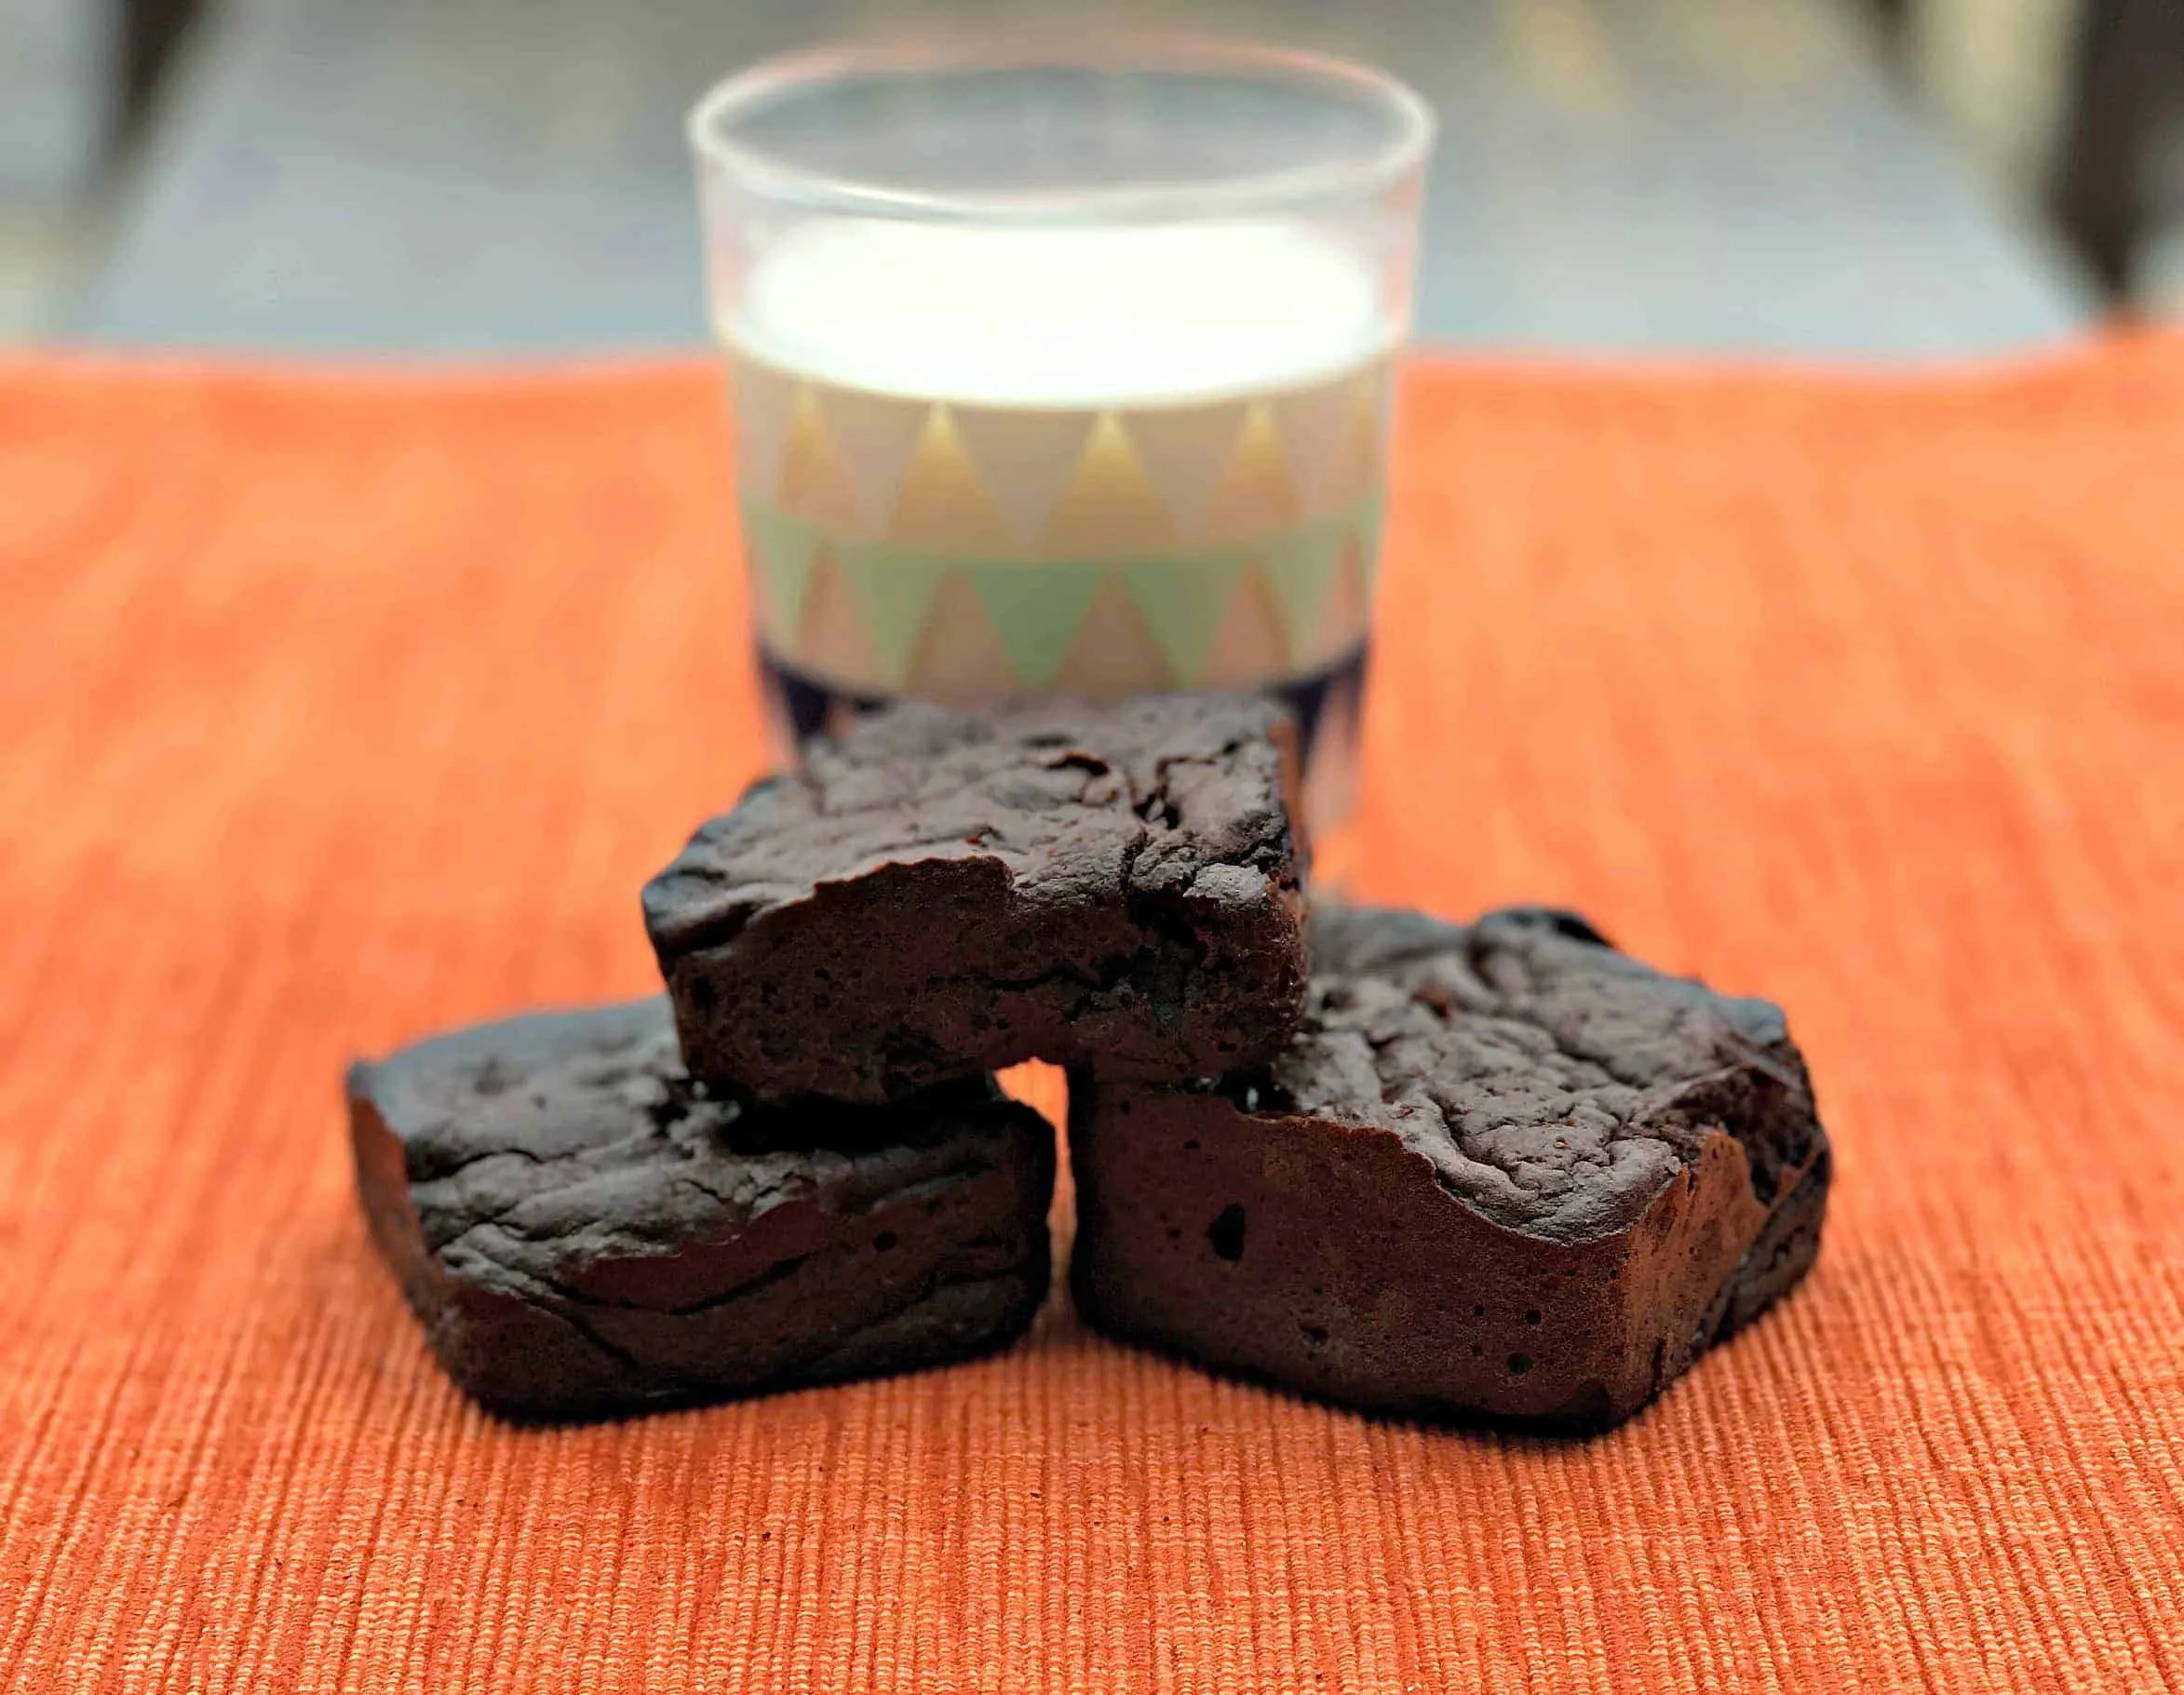 3 brownies stacked in front of a glass of milk